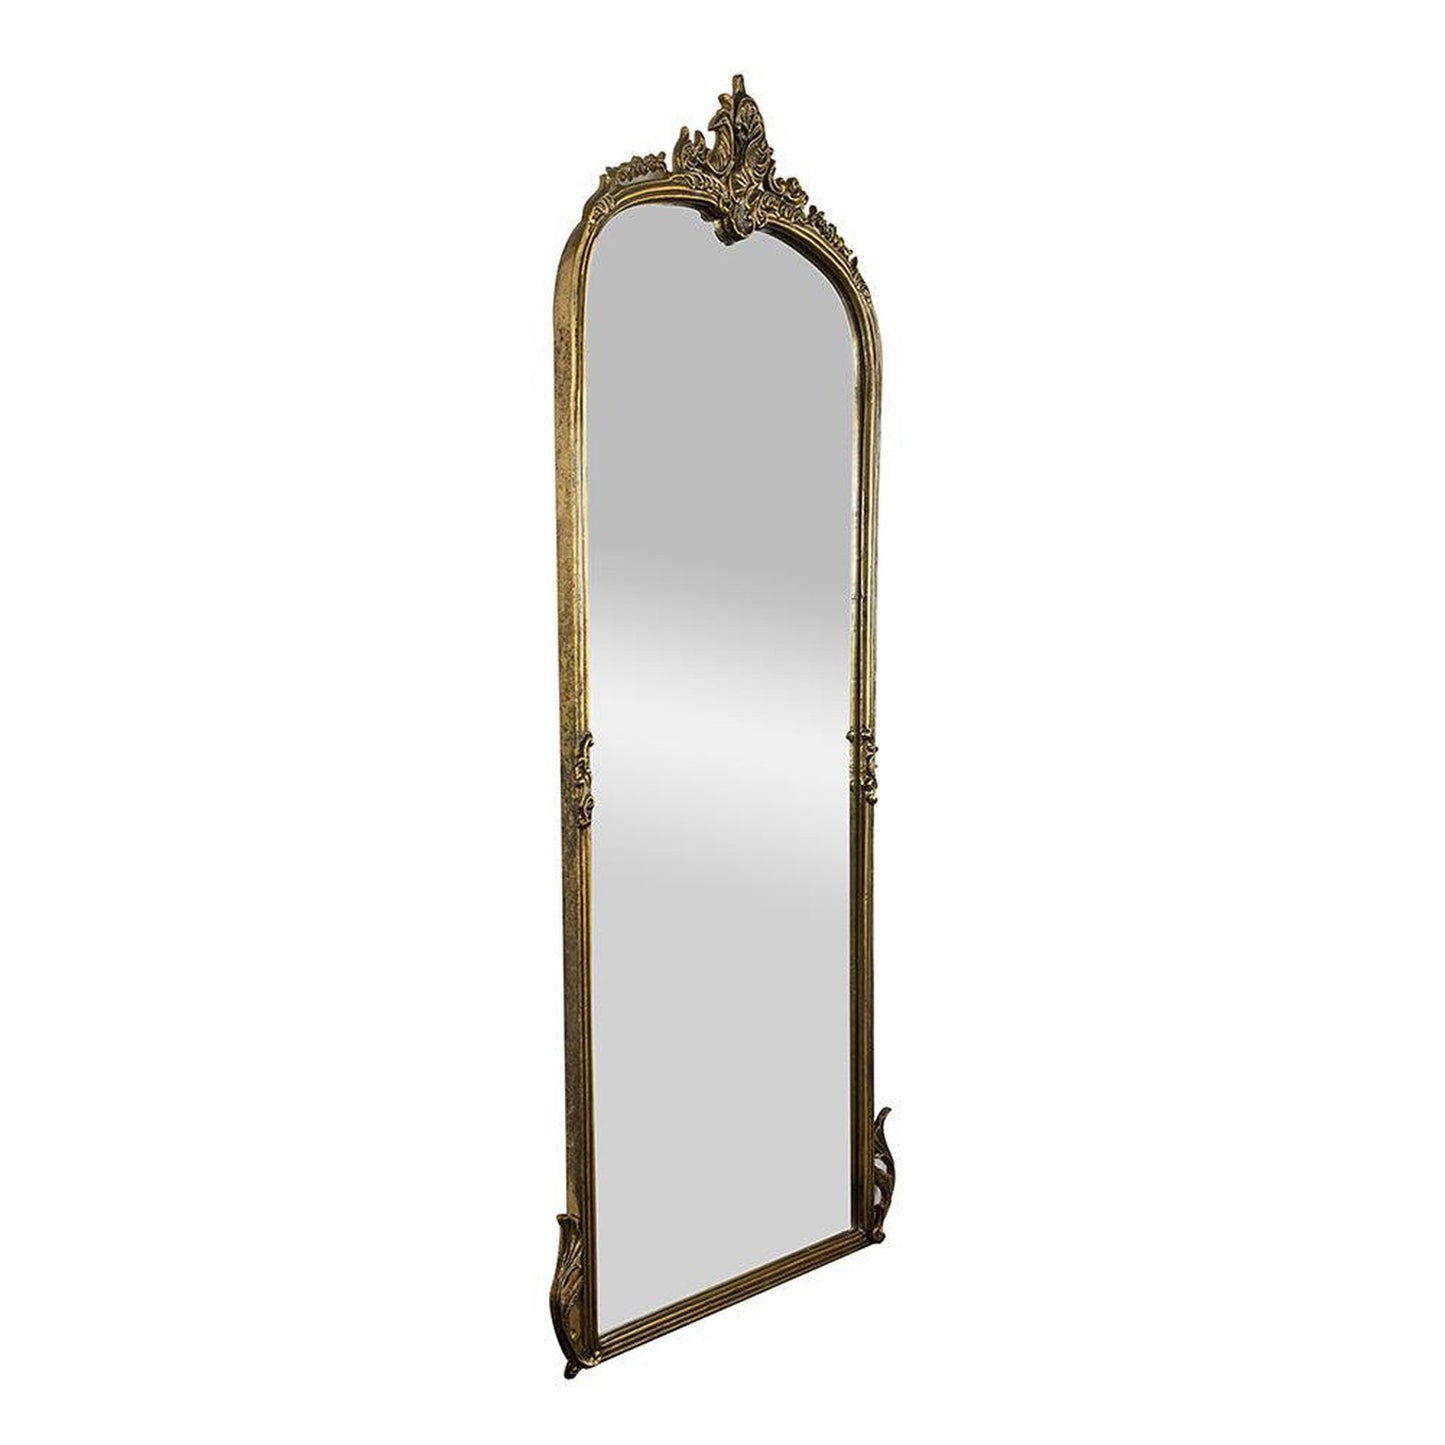 A&B Home Mabon 24" x 60" Bundle of 8 Arched Baroque-Inspired Design Gold Framed Floor & Wall Mirror